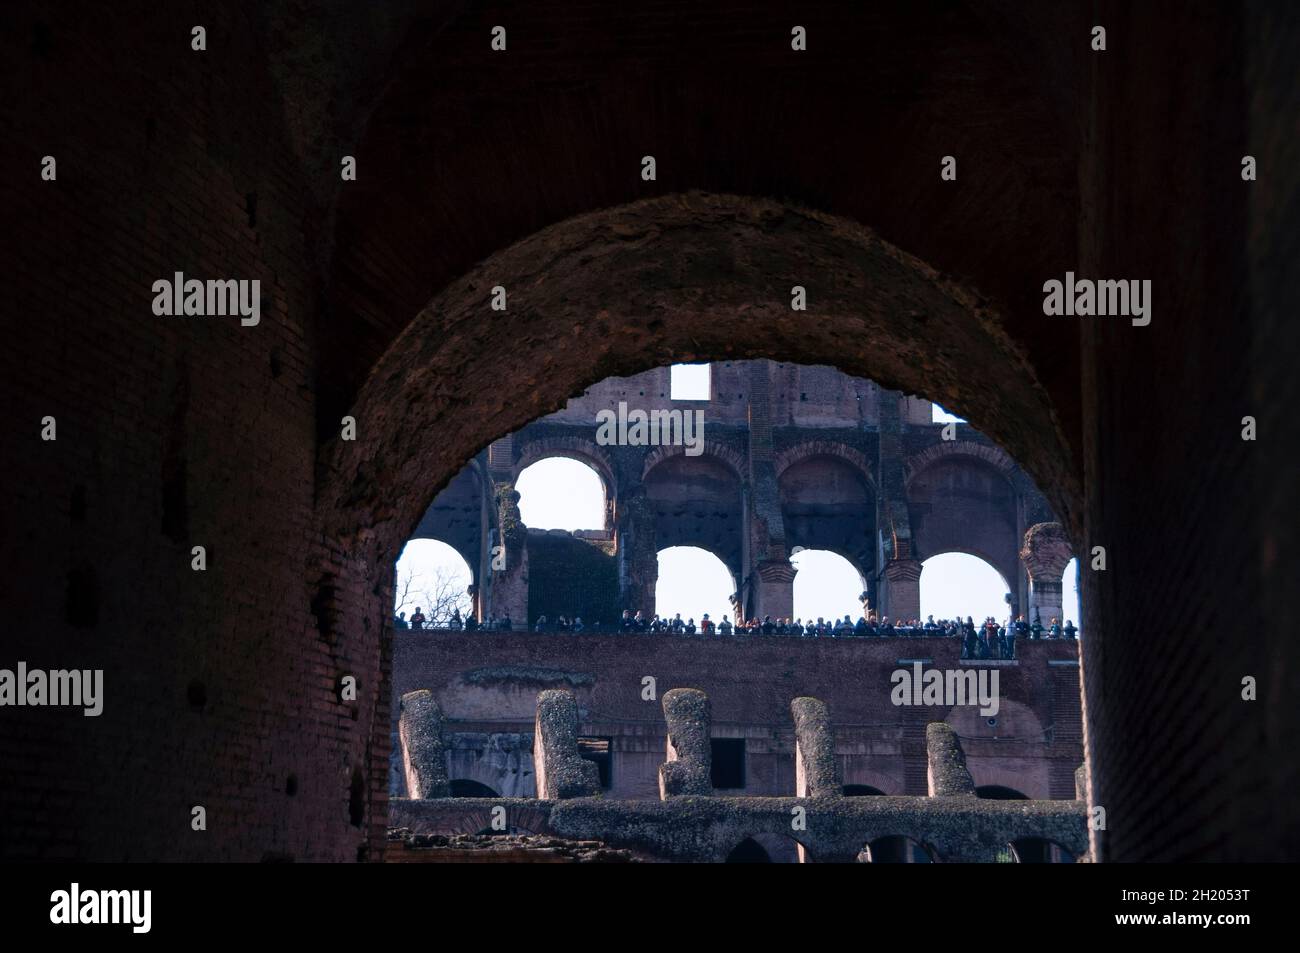 Visitors give scale to the gigantic Roman Colosseum, Italy. Stock Photo